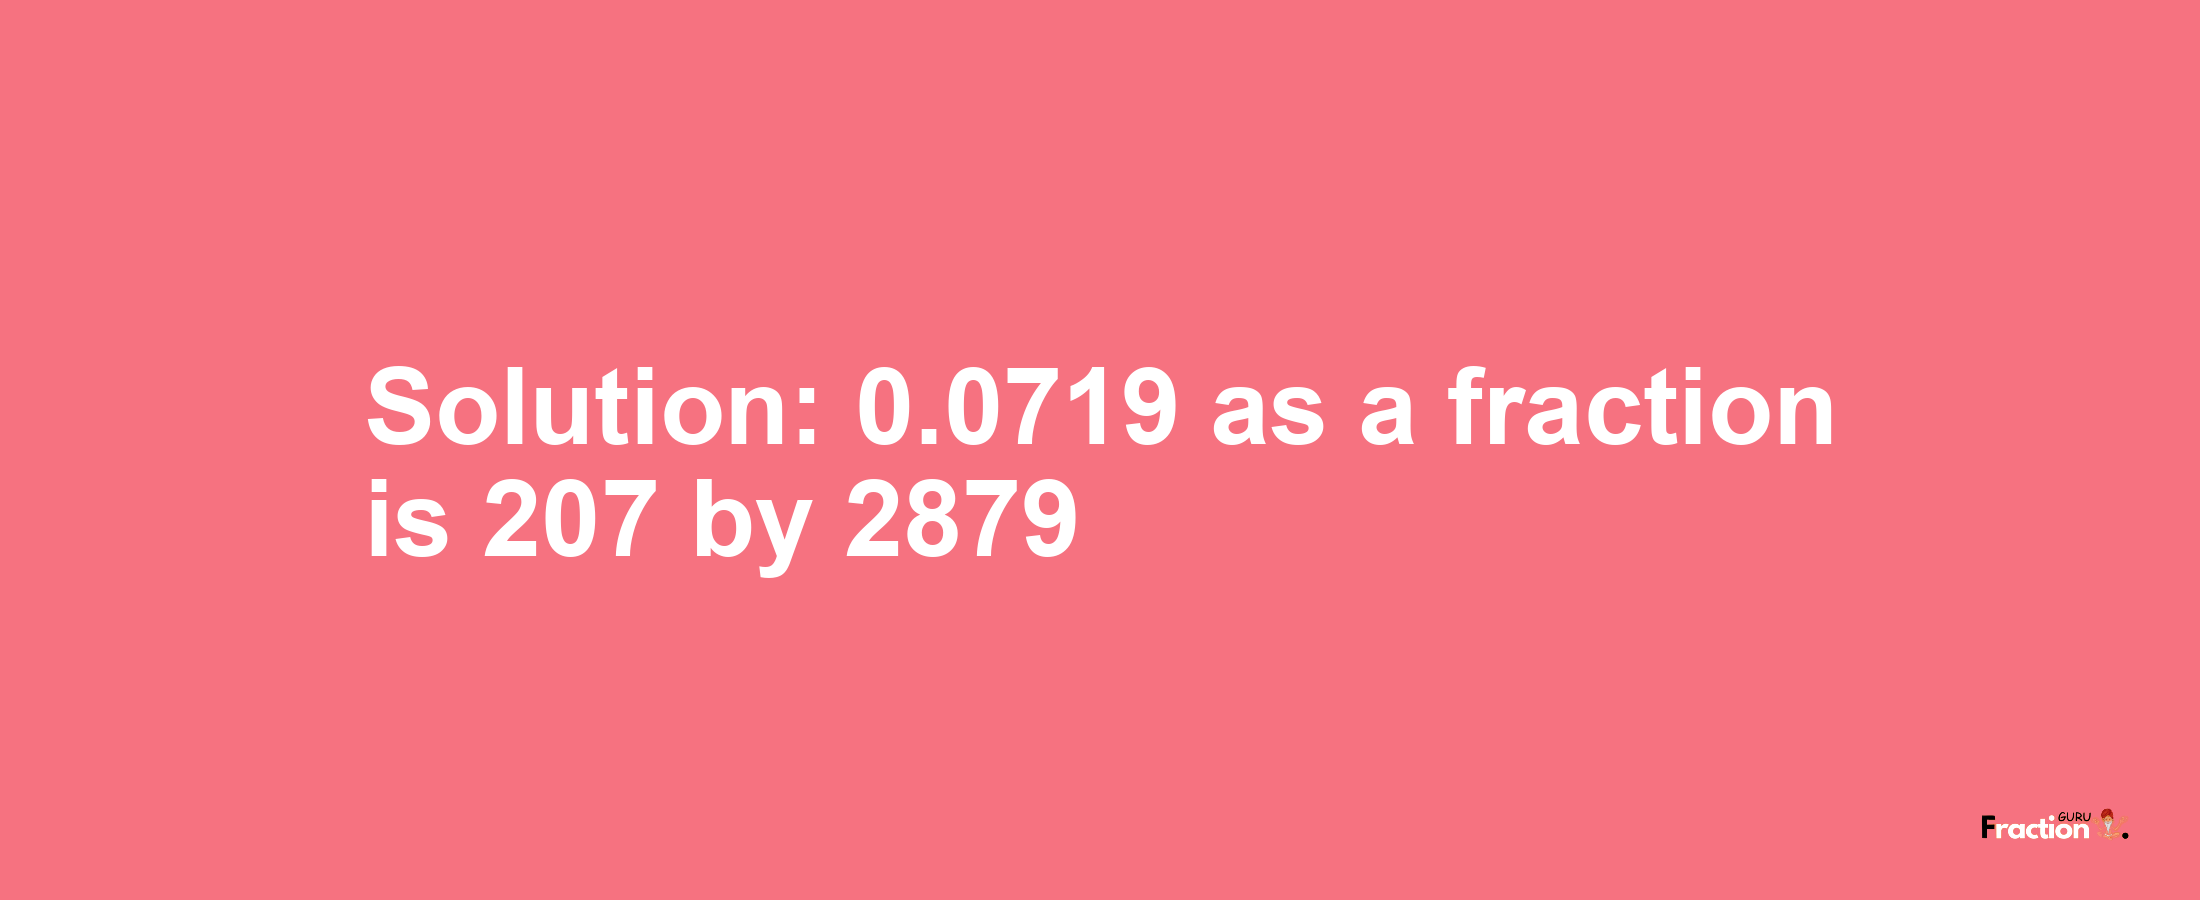 Solution:0.0719 as a fraction is 207/2879